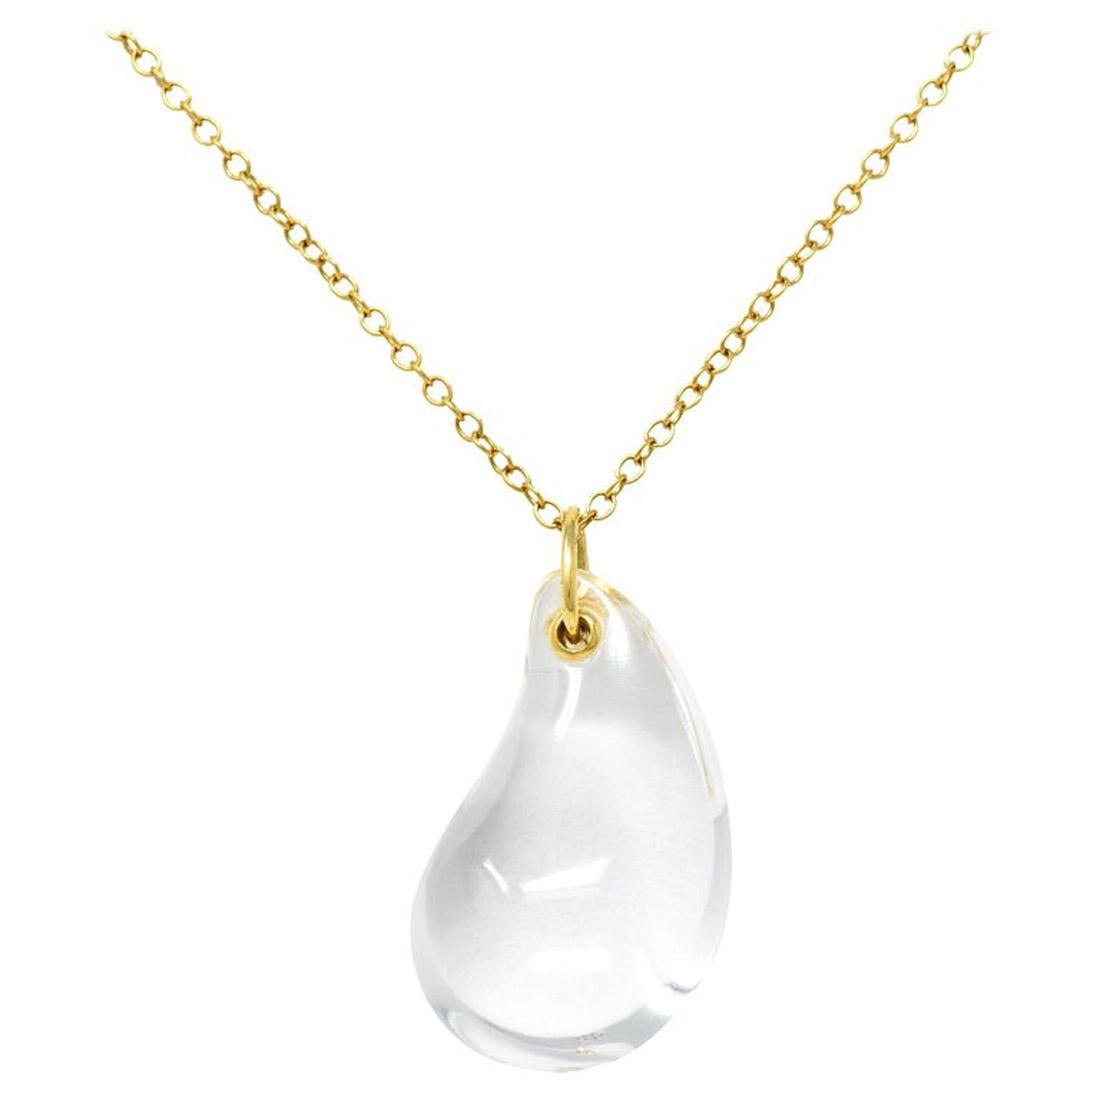 This elegant authentic necklace is from Tiffany & Co. by Elsa Peretti from her Tear Drop collection. The pendant is a stunning clear rock crystal tear drop and comes with a classic 18k yellow gold chain. It is signed by the designer with the gold